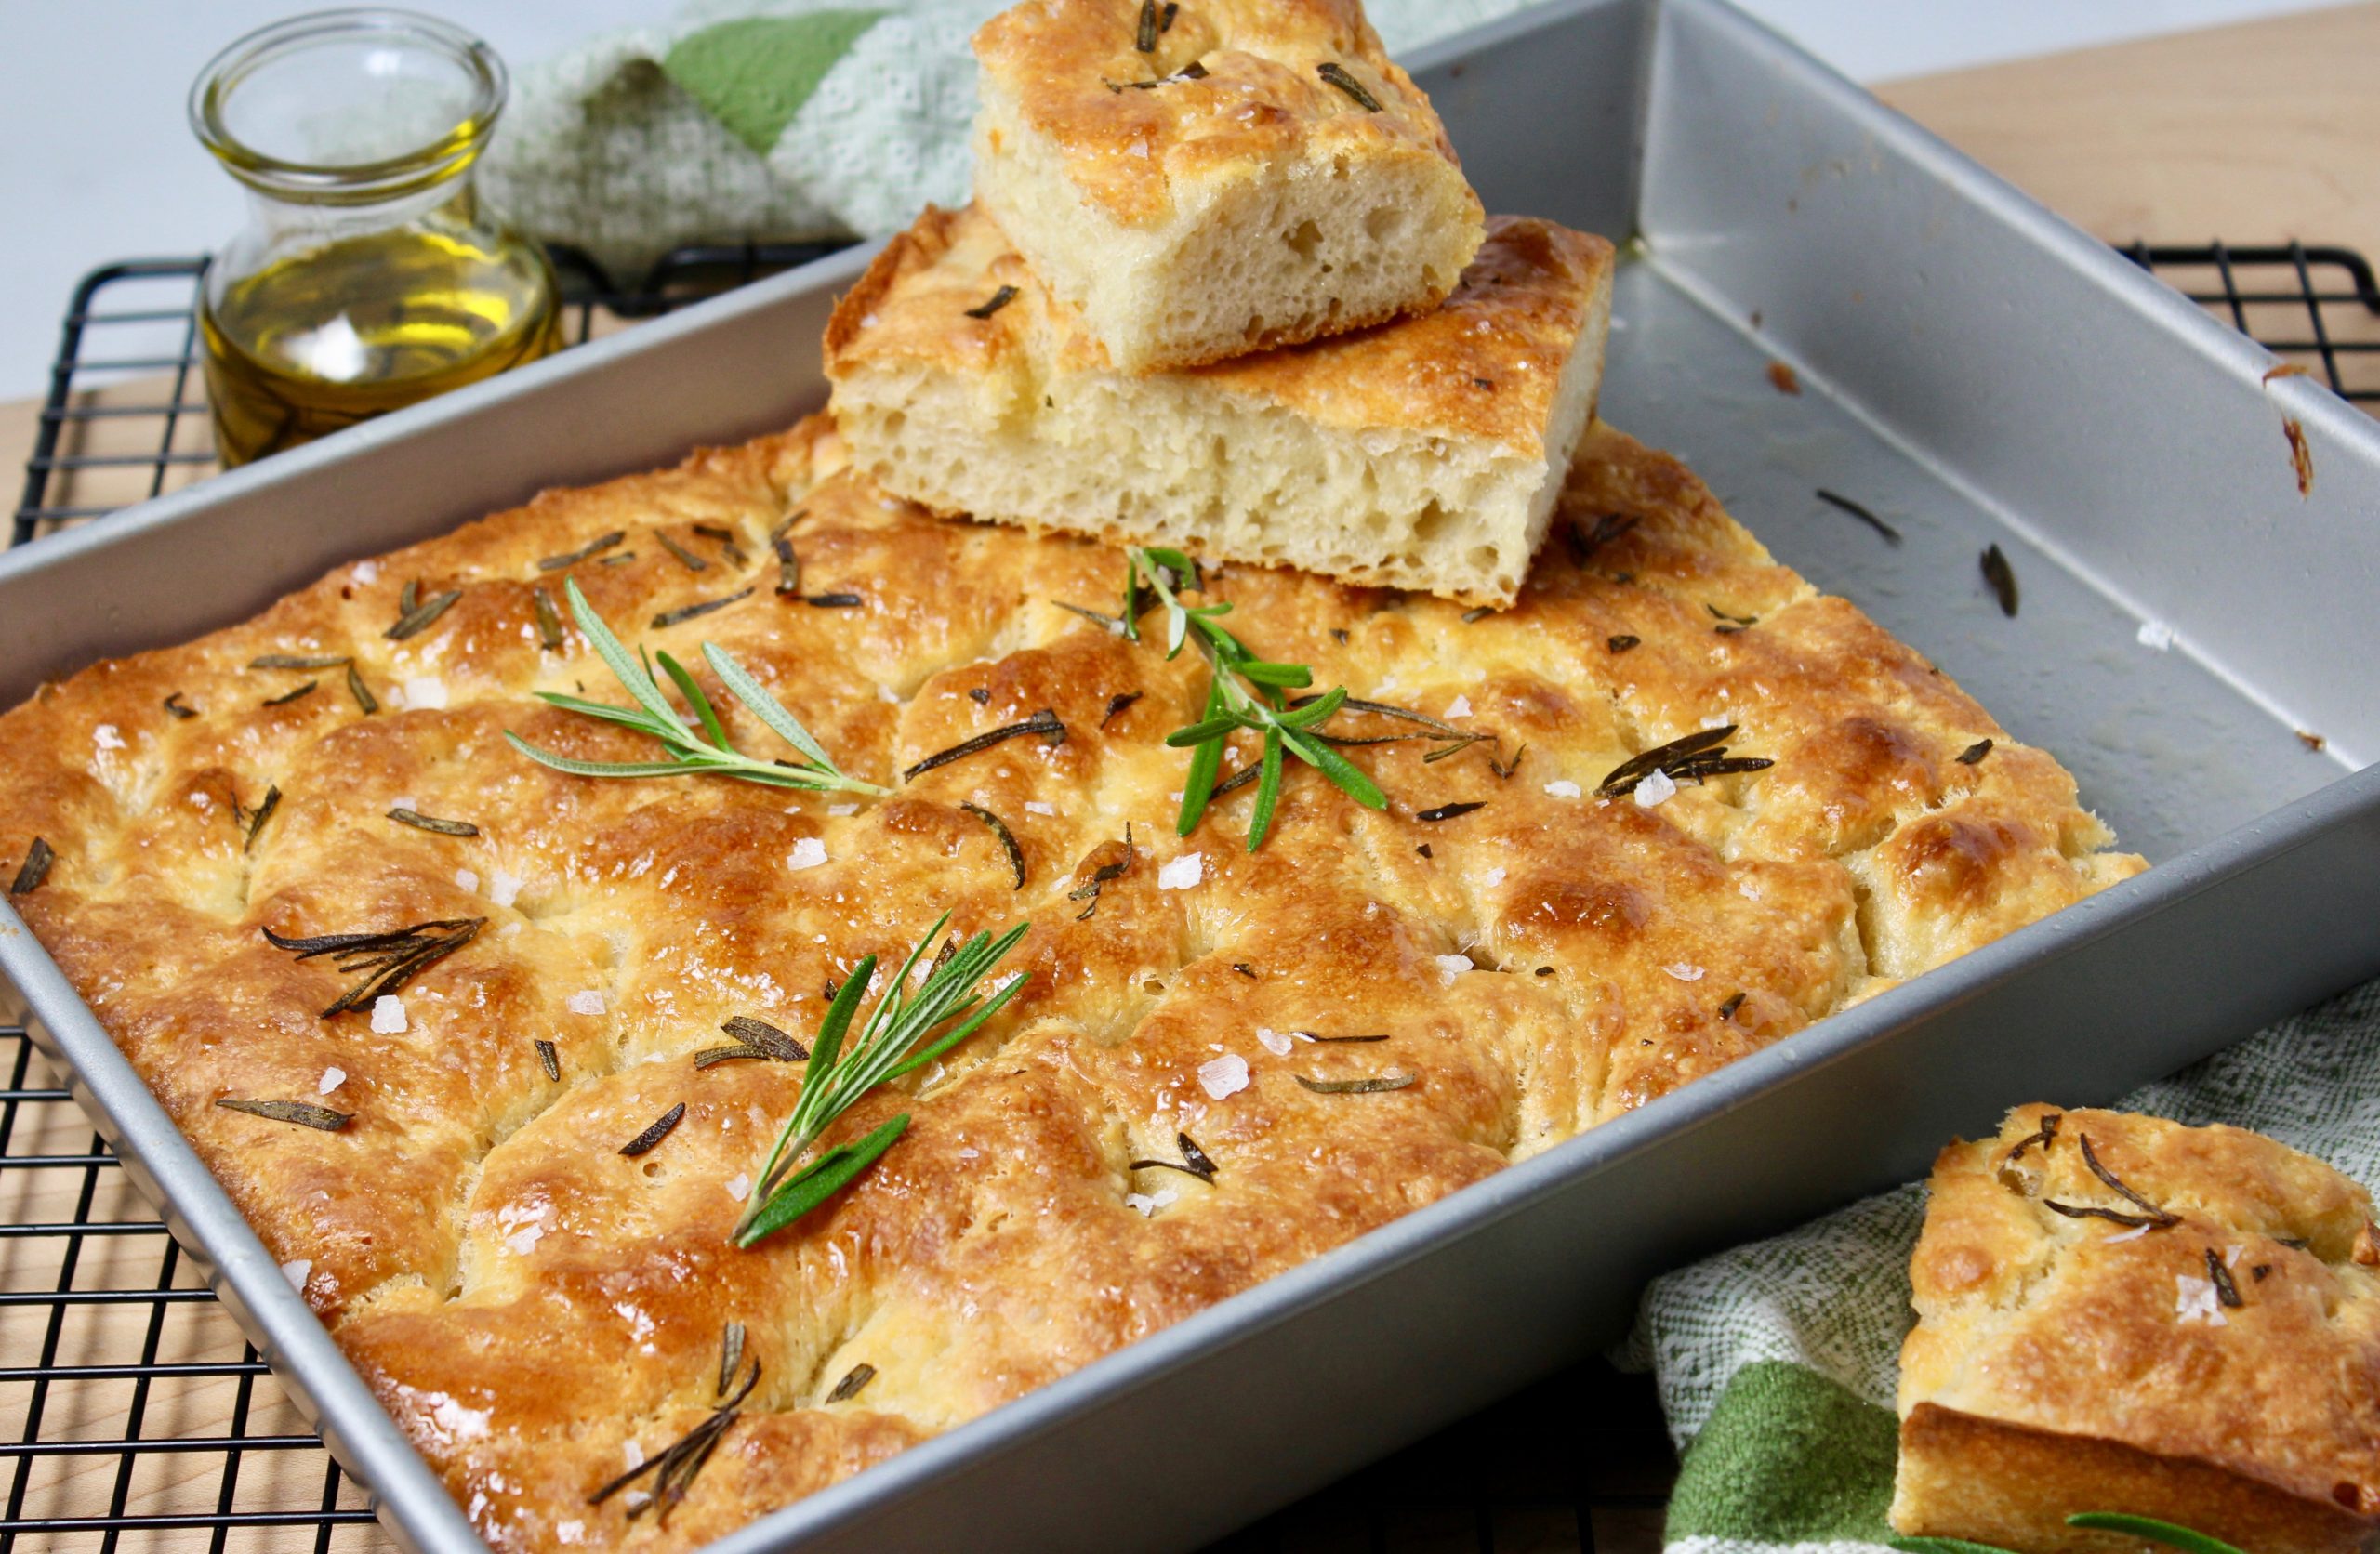 https://www.epicuricloud.com/wp-content/uploads/2020/06/Focaccia-Bread-front-view-scaled.jpg